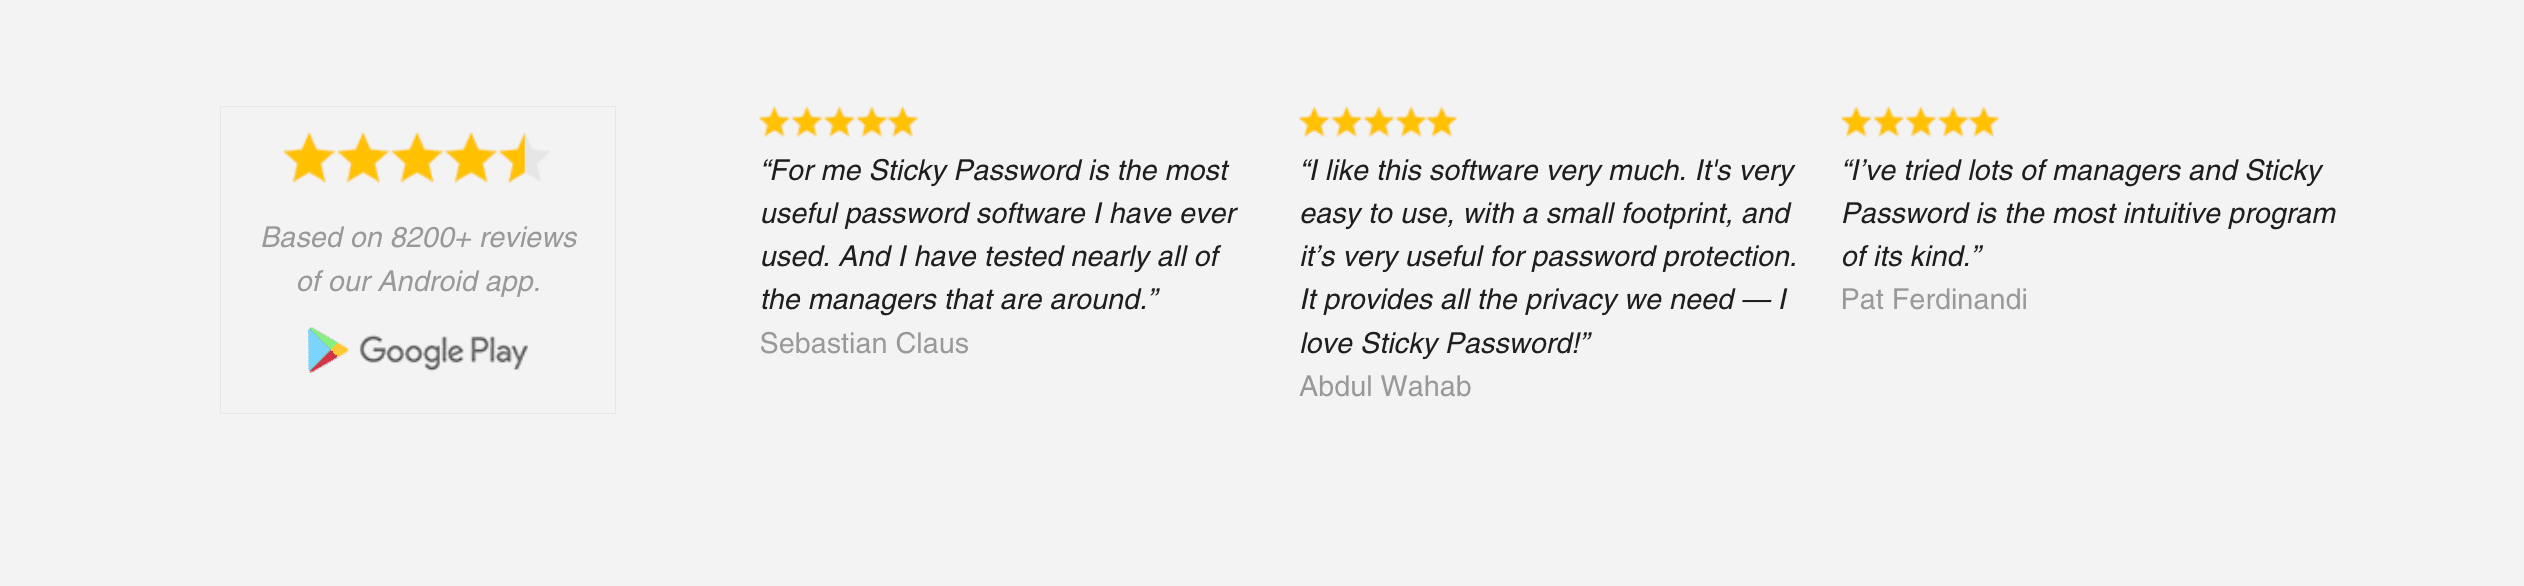 why do we recommend Sticky Password